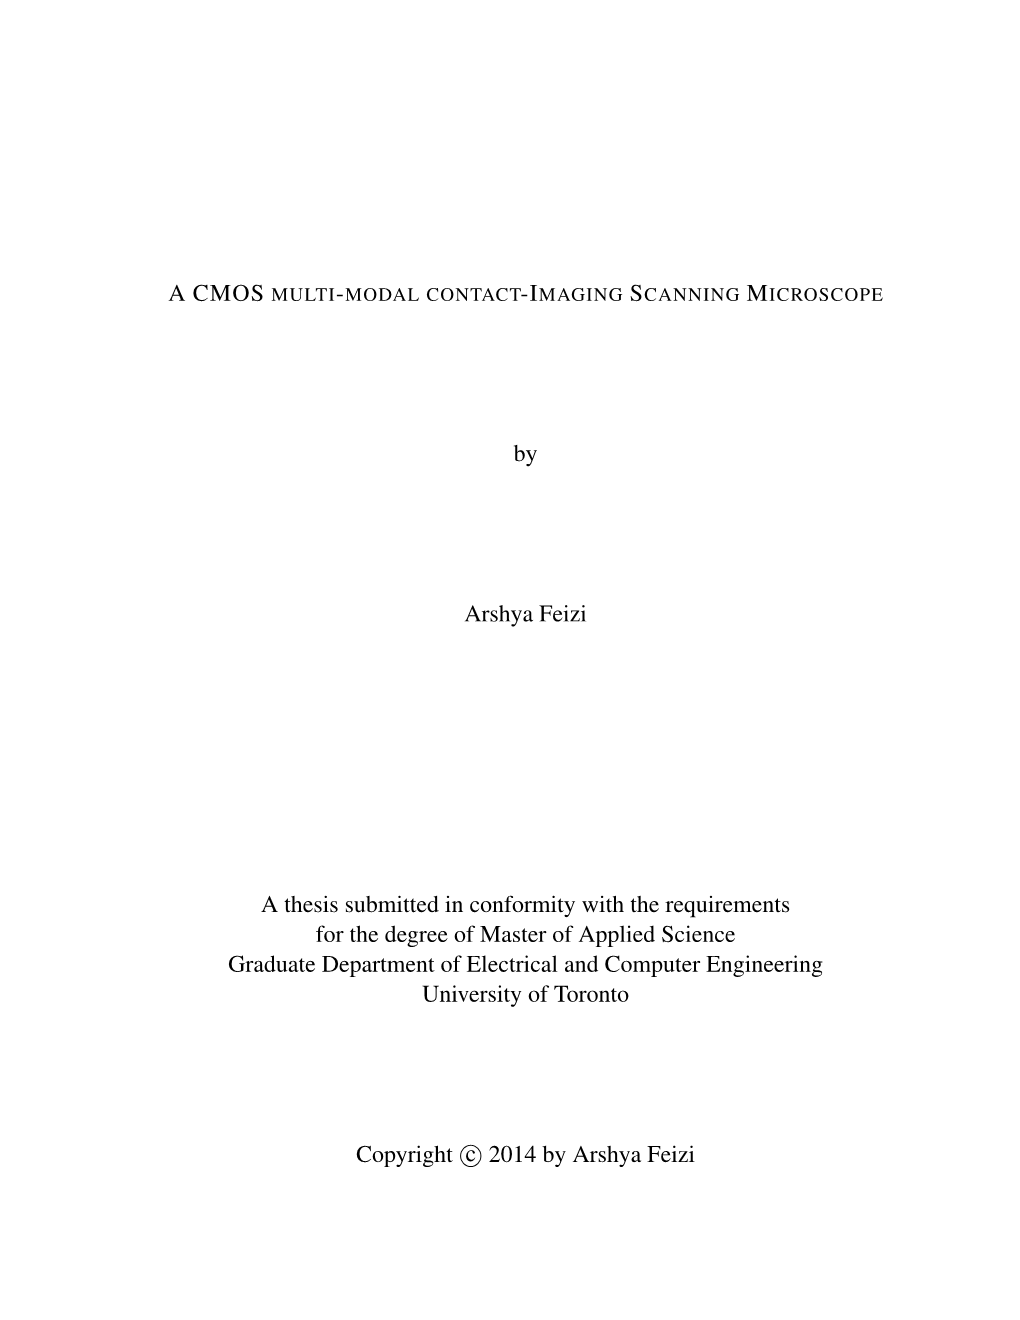 By Arshya Feizi a Thesis Submitted in Conformity with the Requirements For